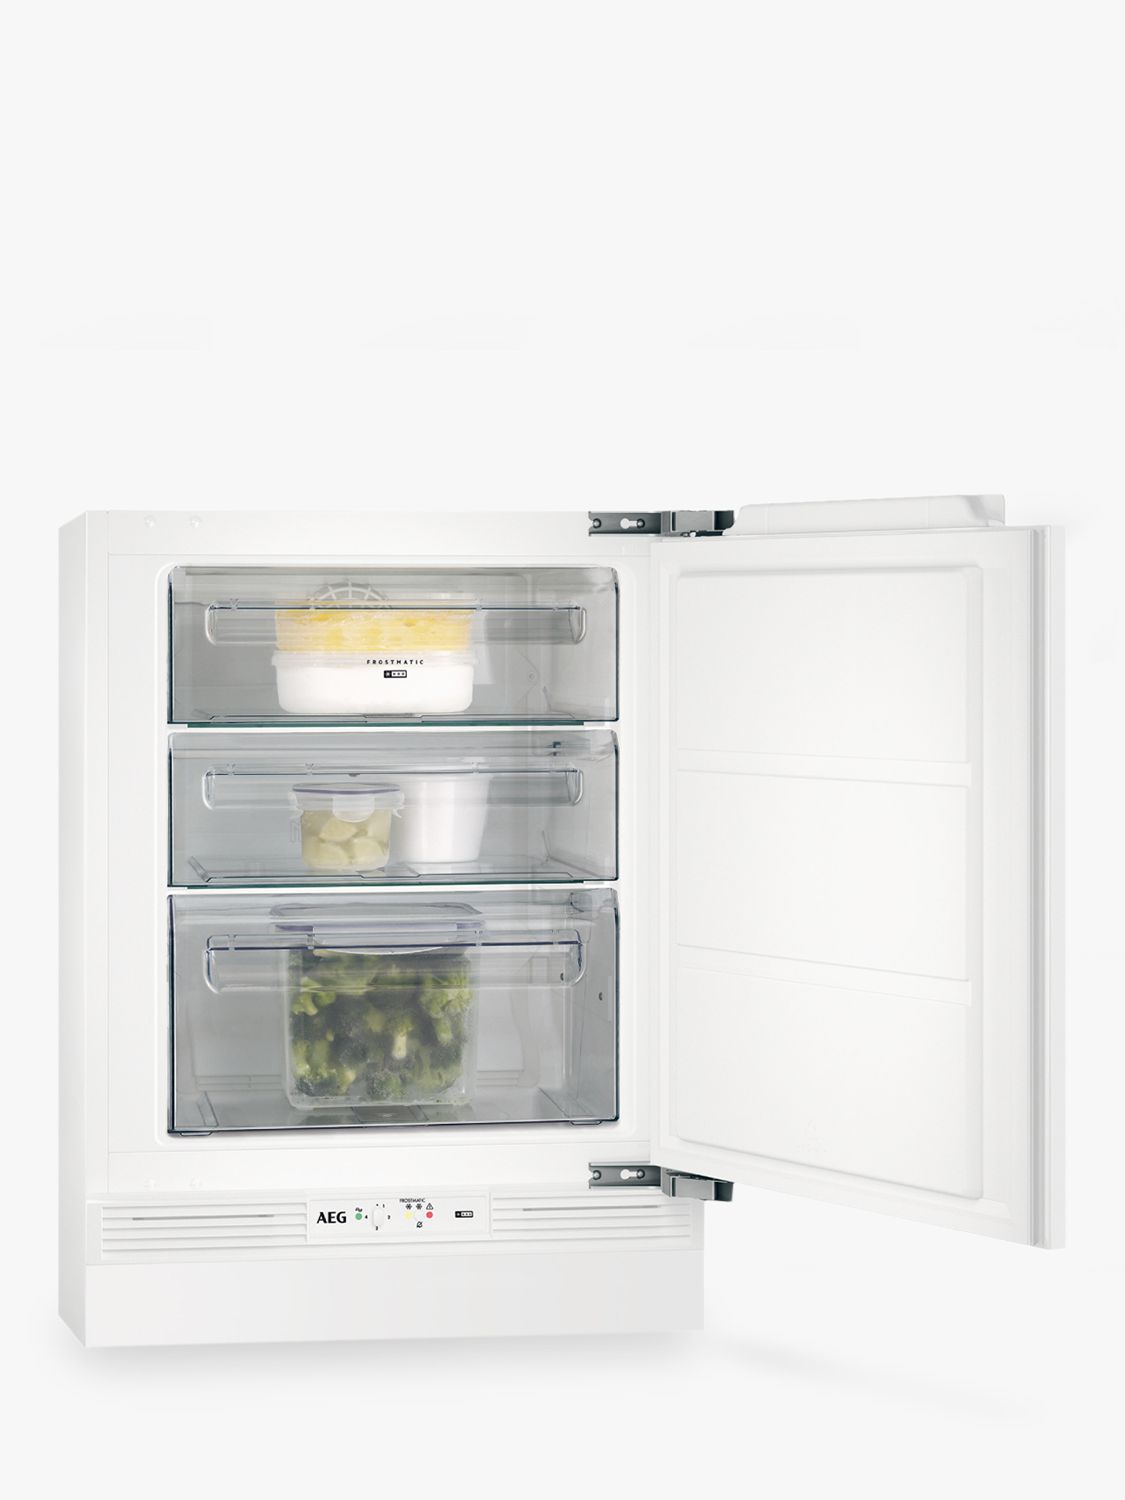 AEG ABE6821VNF Undercounter Freezer, A+ Energy Rating, 60cm Wide, White